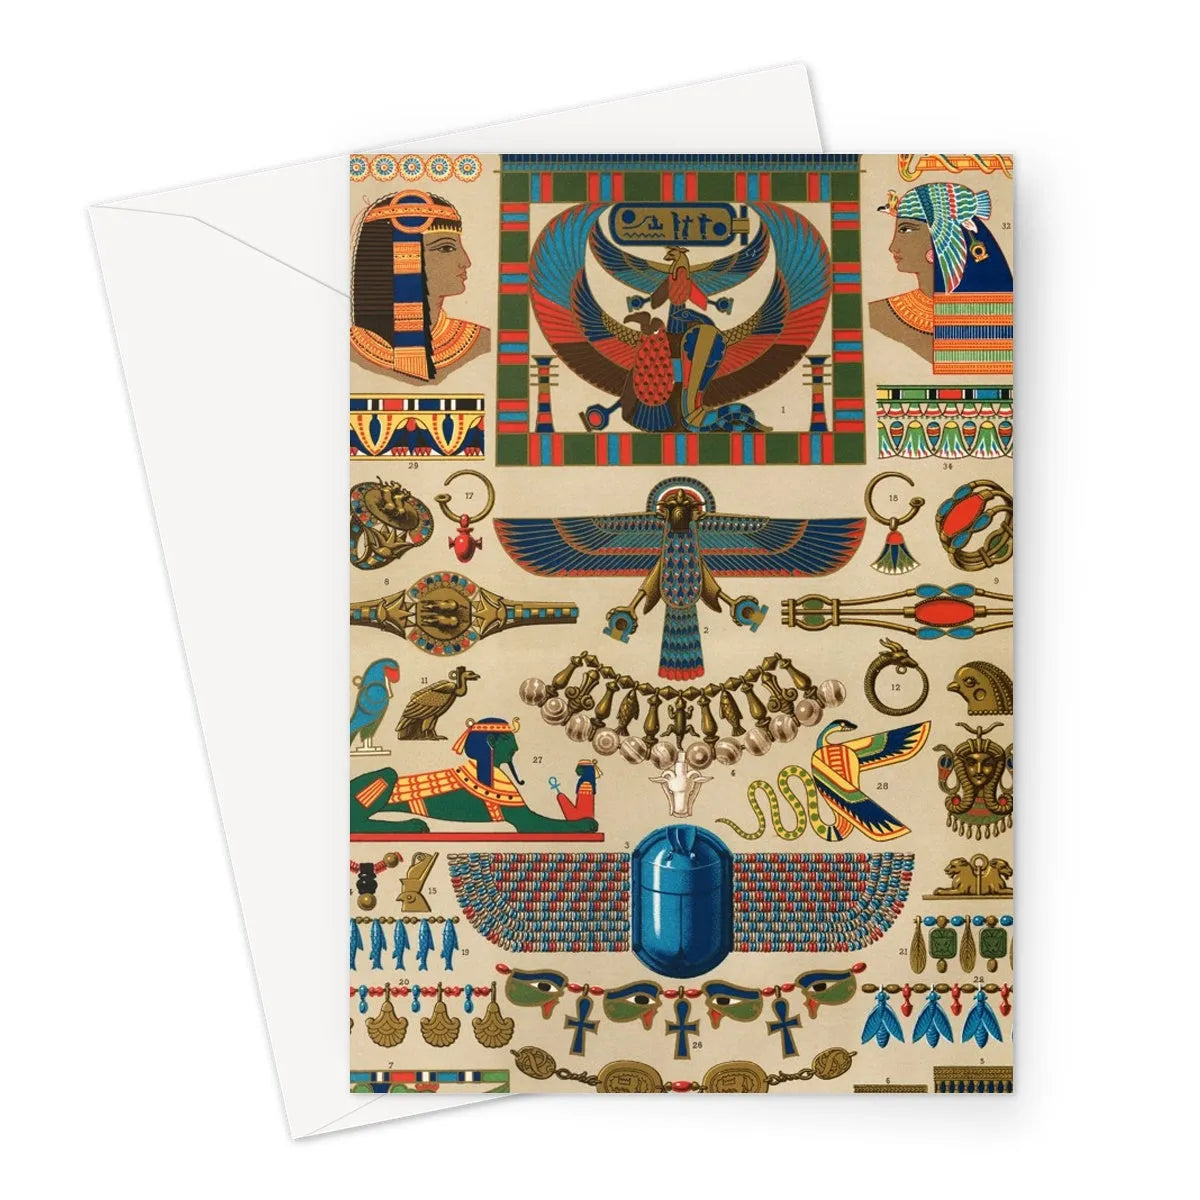 Egyptian Pattern By Auguste Racinet Greeting Card - A5 Portrait / 1 Card - Greeting & Note Cards - Aesthetic Art